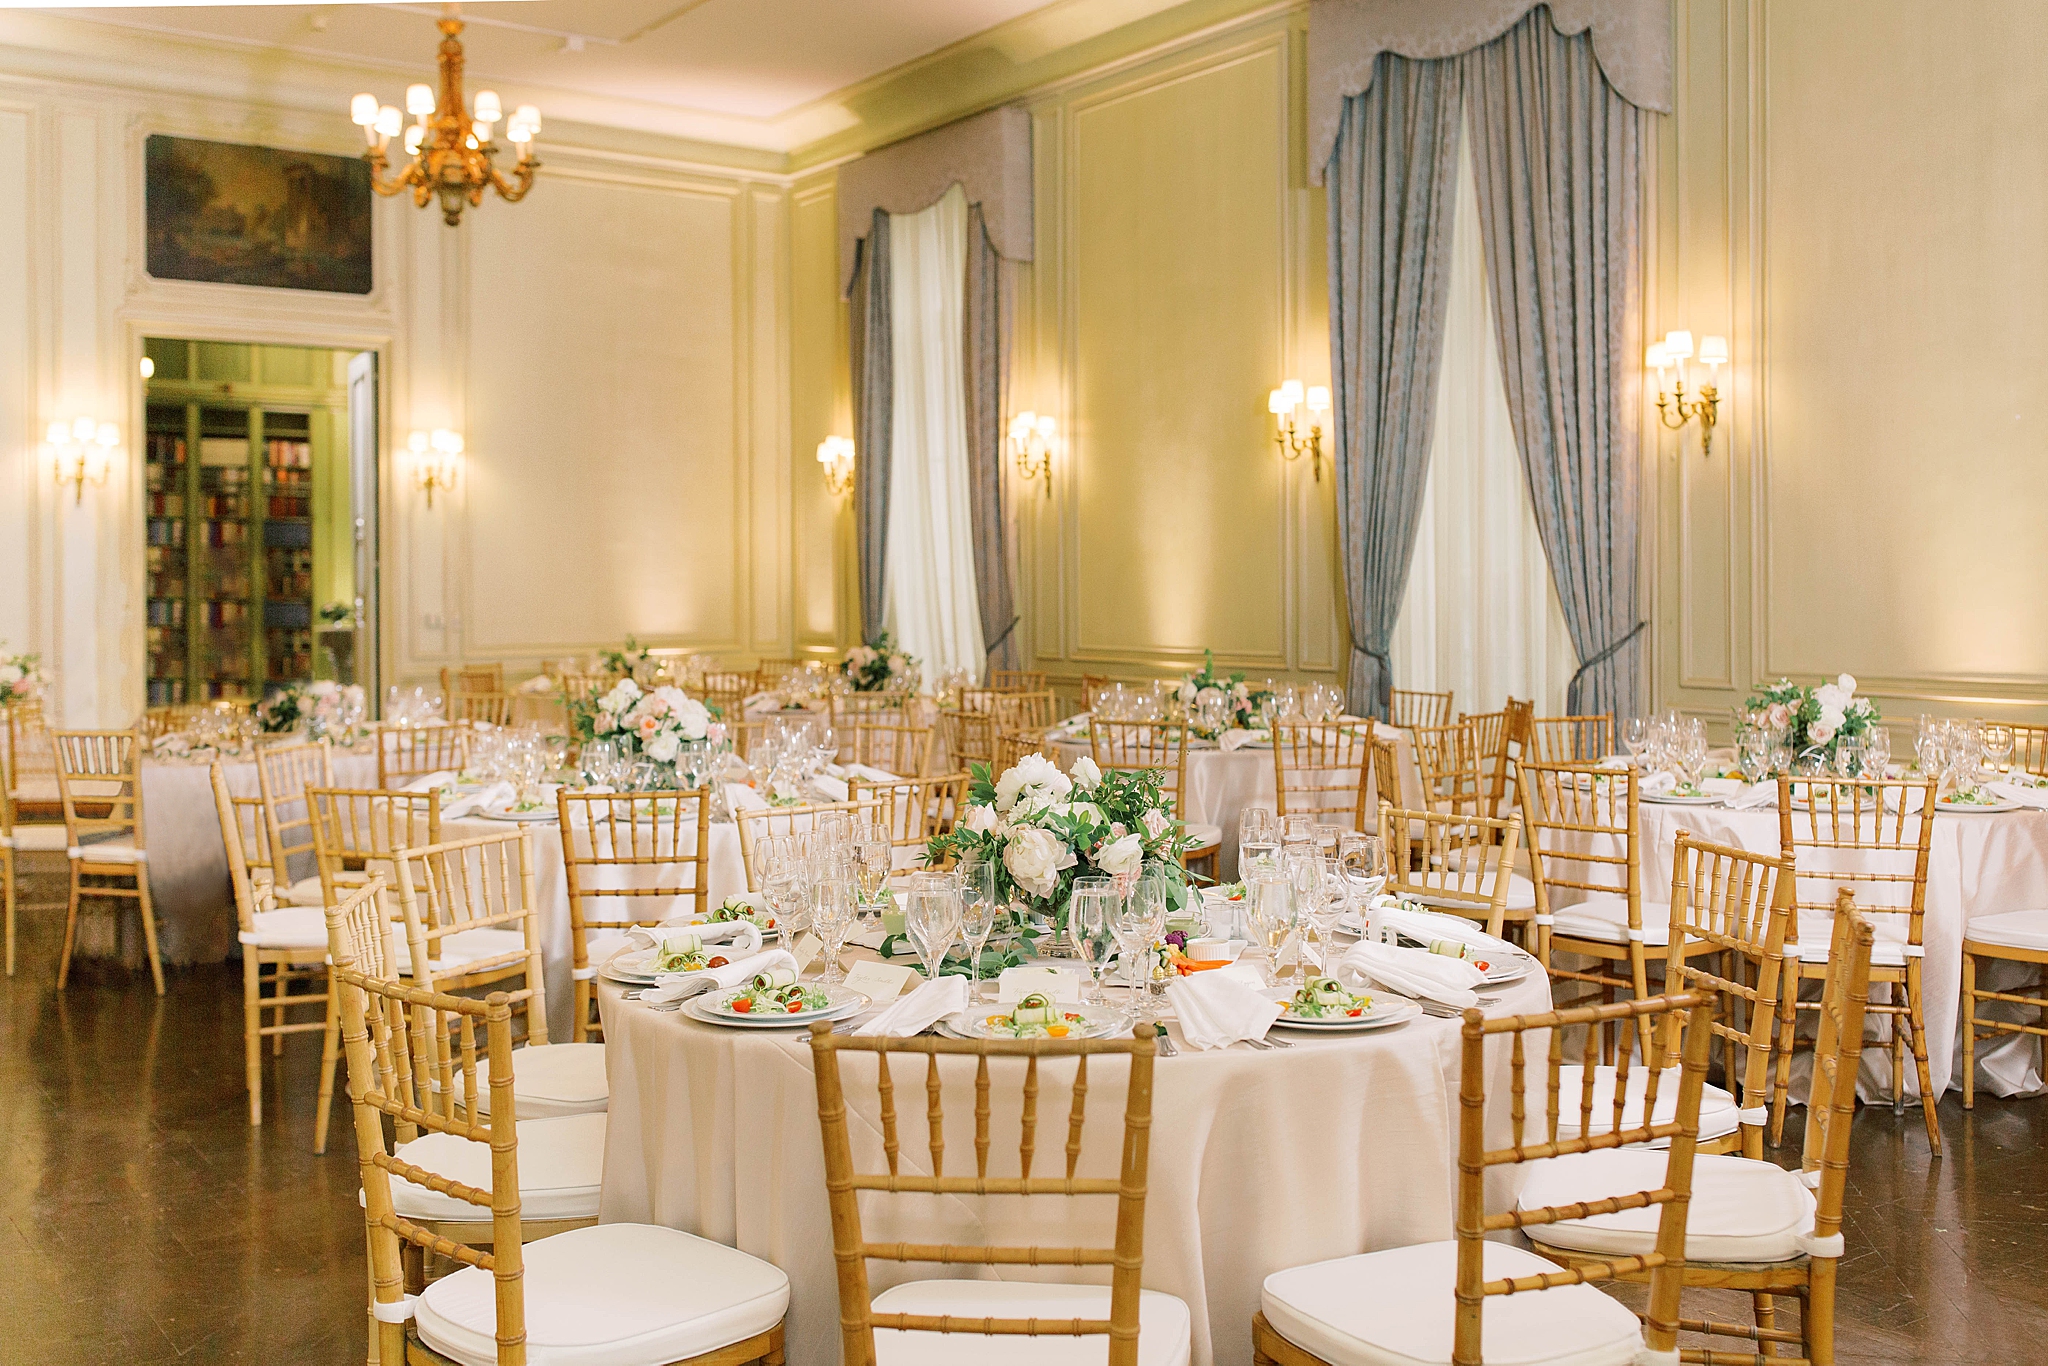 Reception decor for a wedding at the Meridian House in Washington, DC.